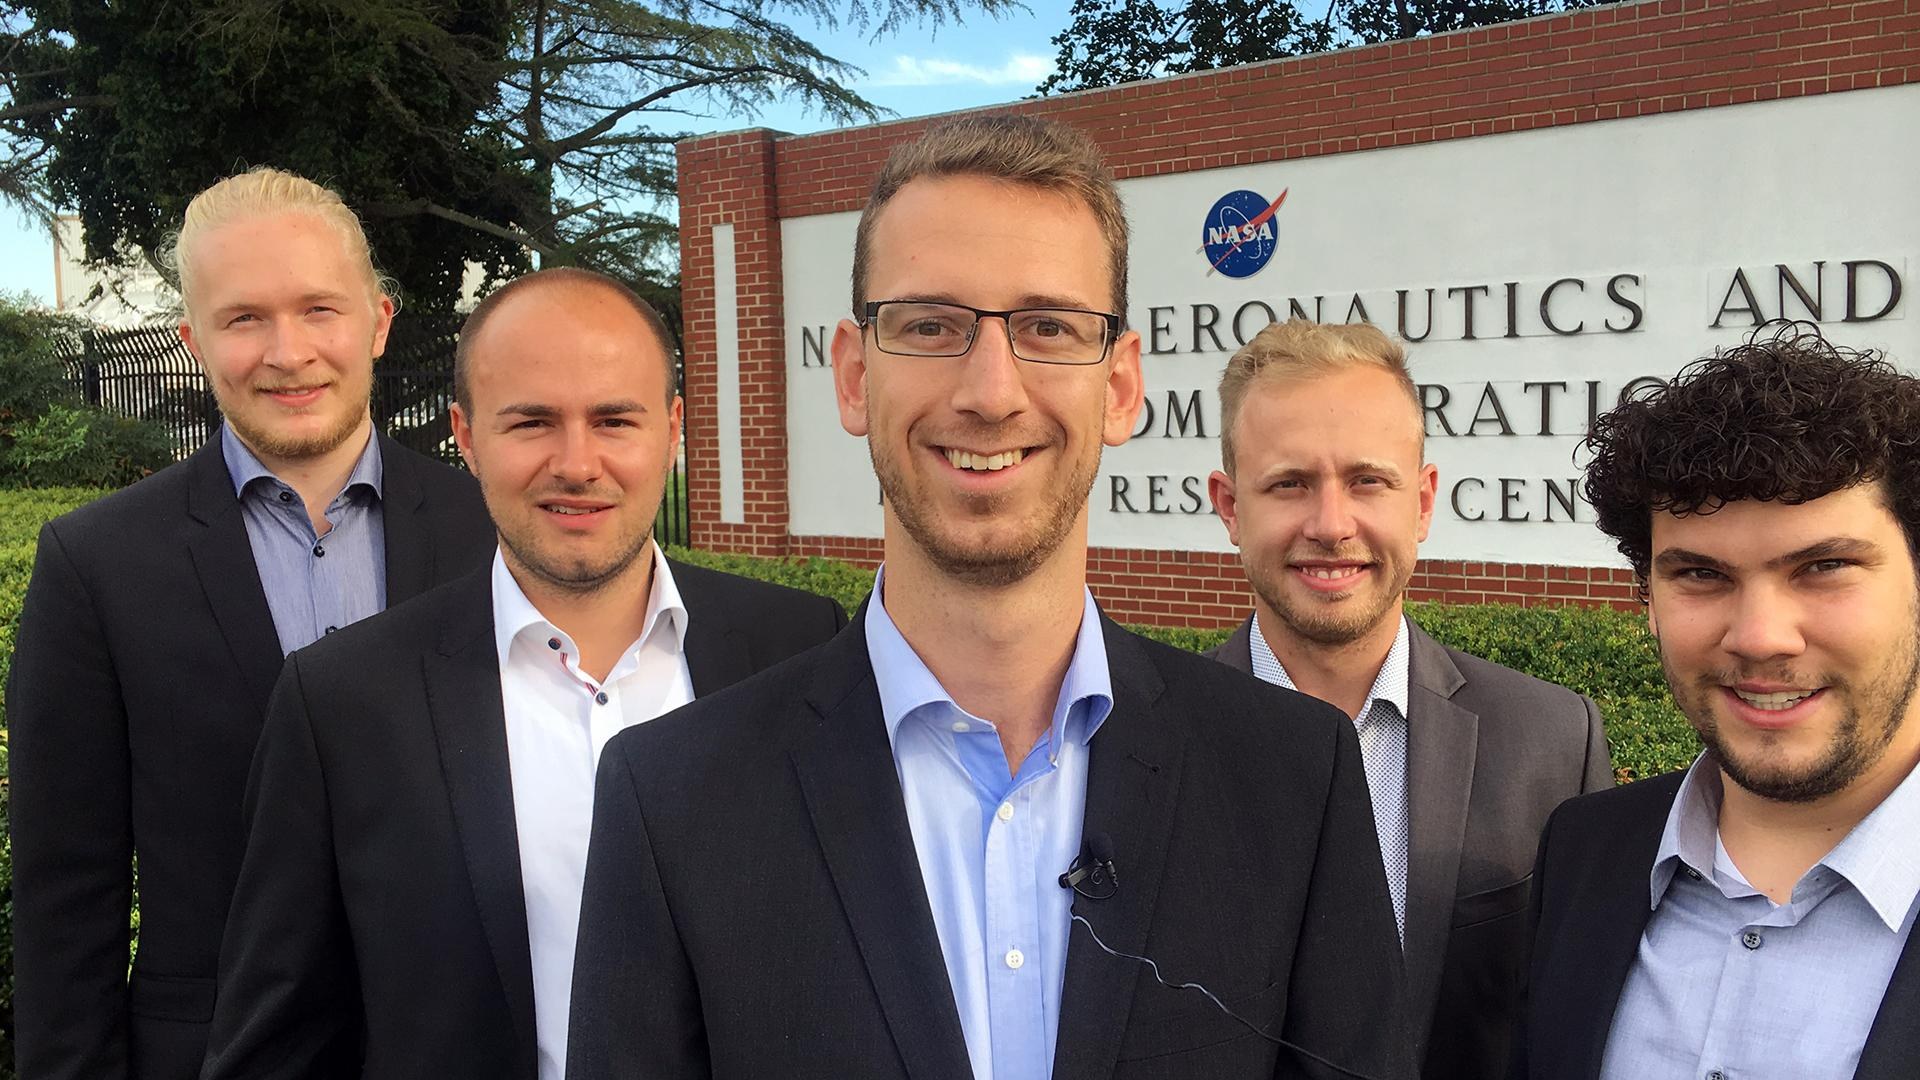 The University of Stuttgart team at the entrance to NASA’s Langley Research Center